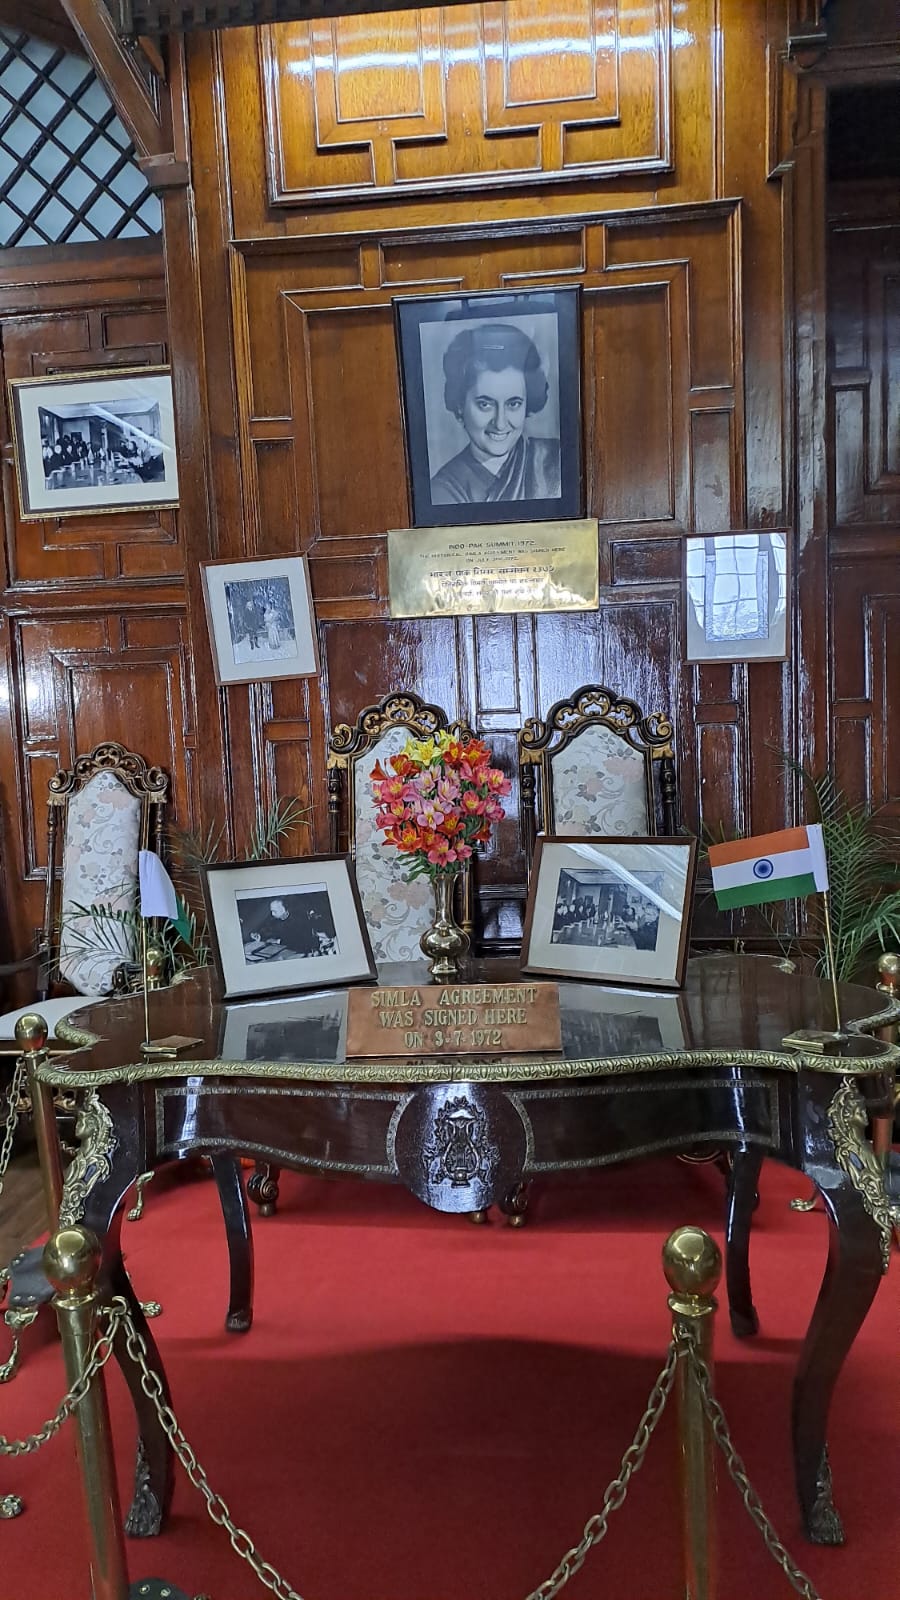 Shimla Agreement 1972: The historic Shimla Agreement was signed here, a voice echoed at night - a boy was born